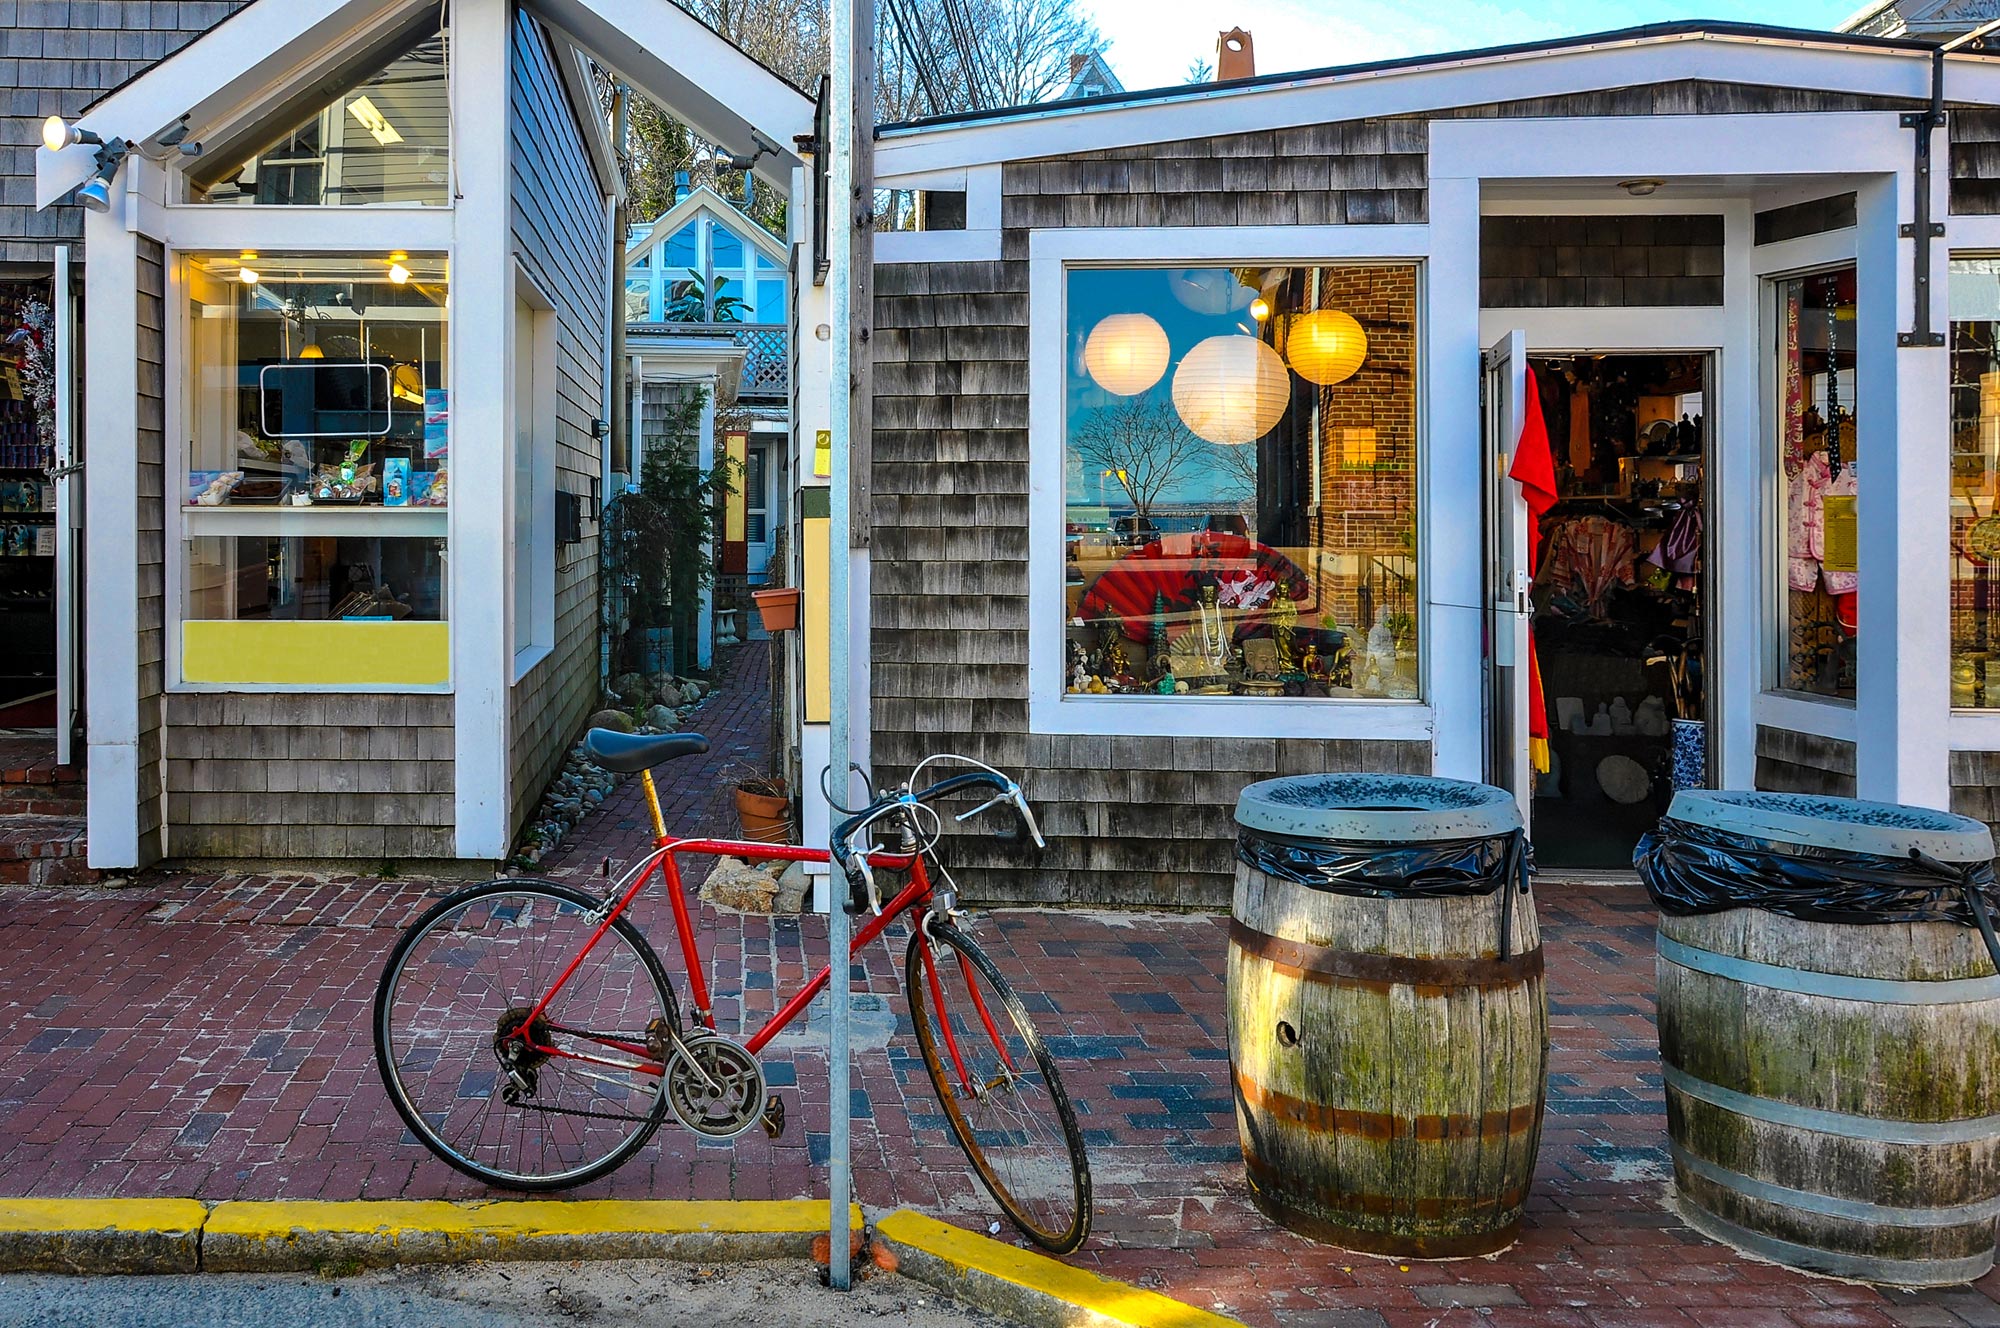 Picturesque small-town storefront